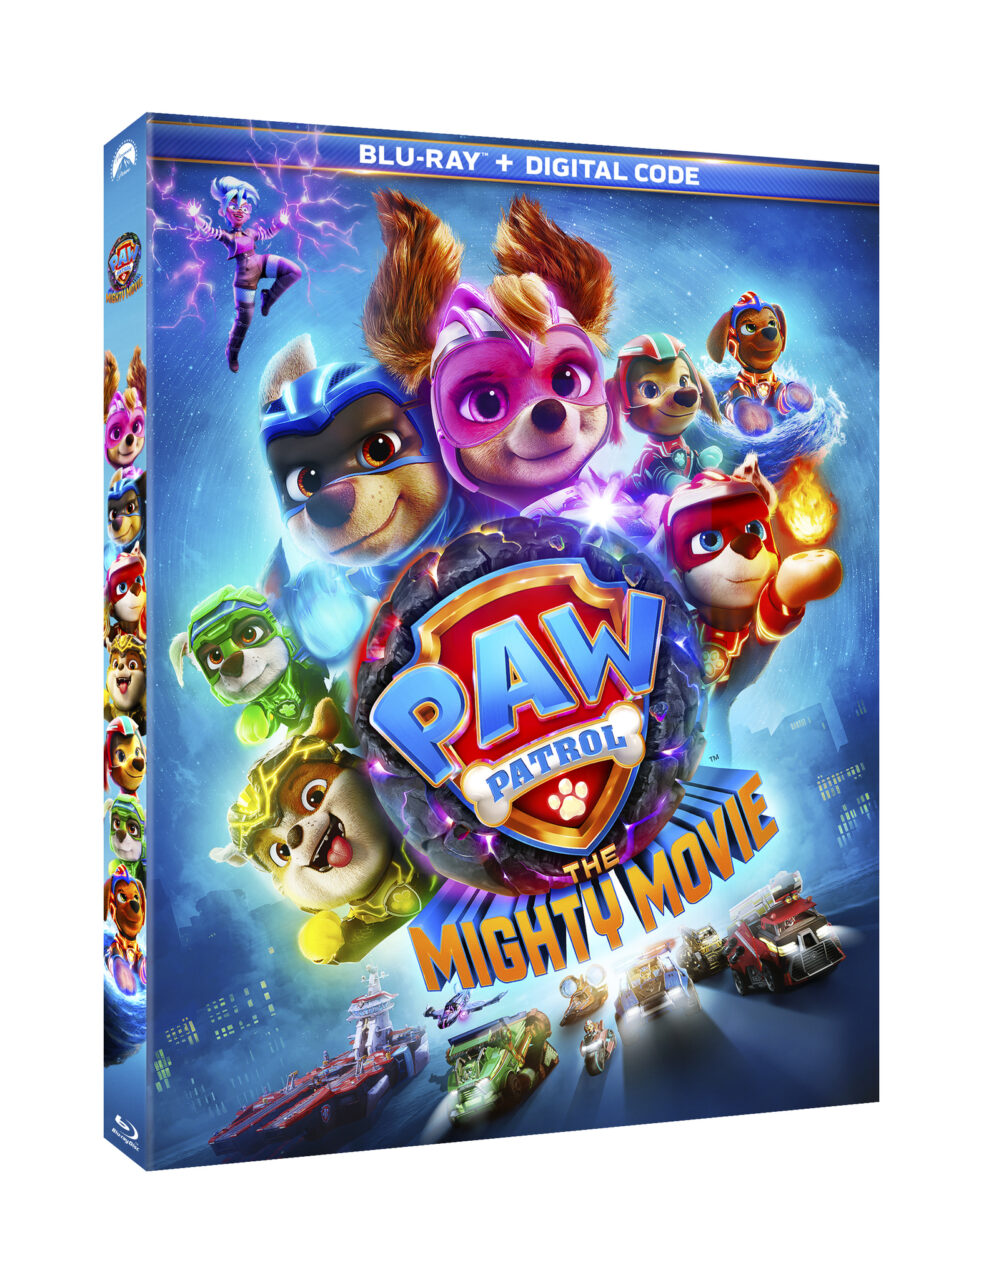 Paw Patrol: The Mighty Movie Blu-Ray Combo Pack cover (Paramount Home Entertainment)